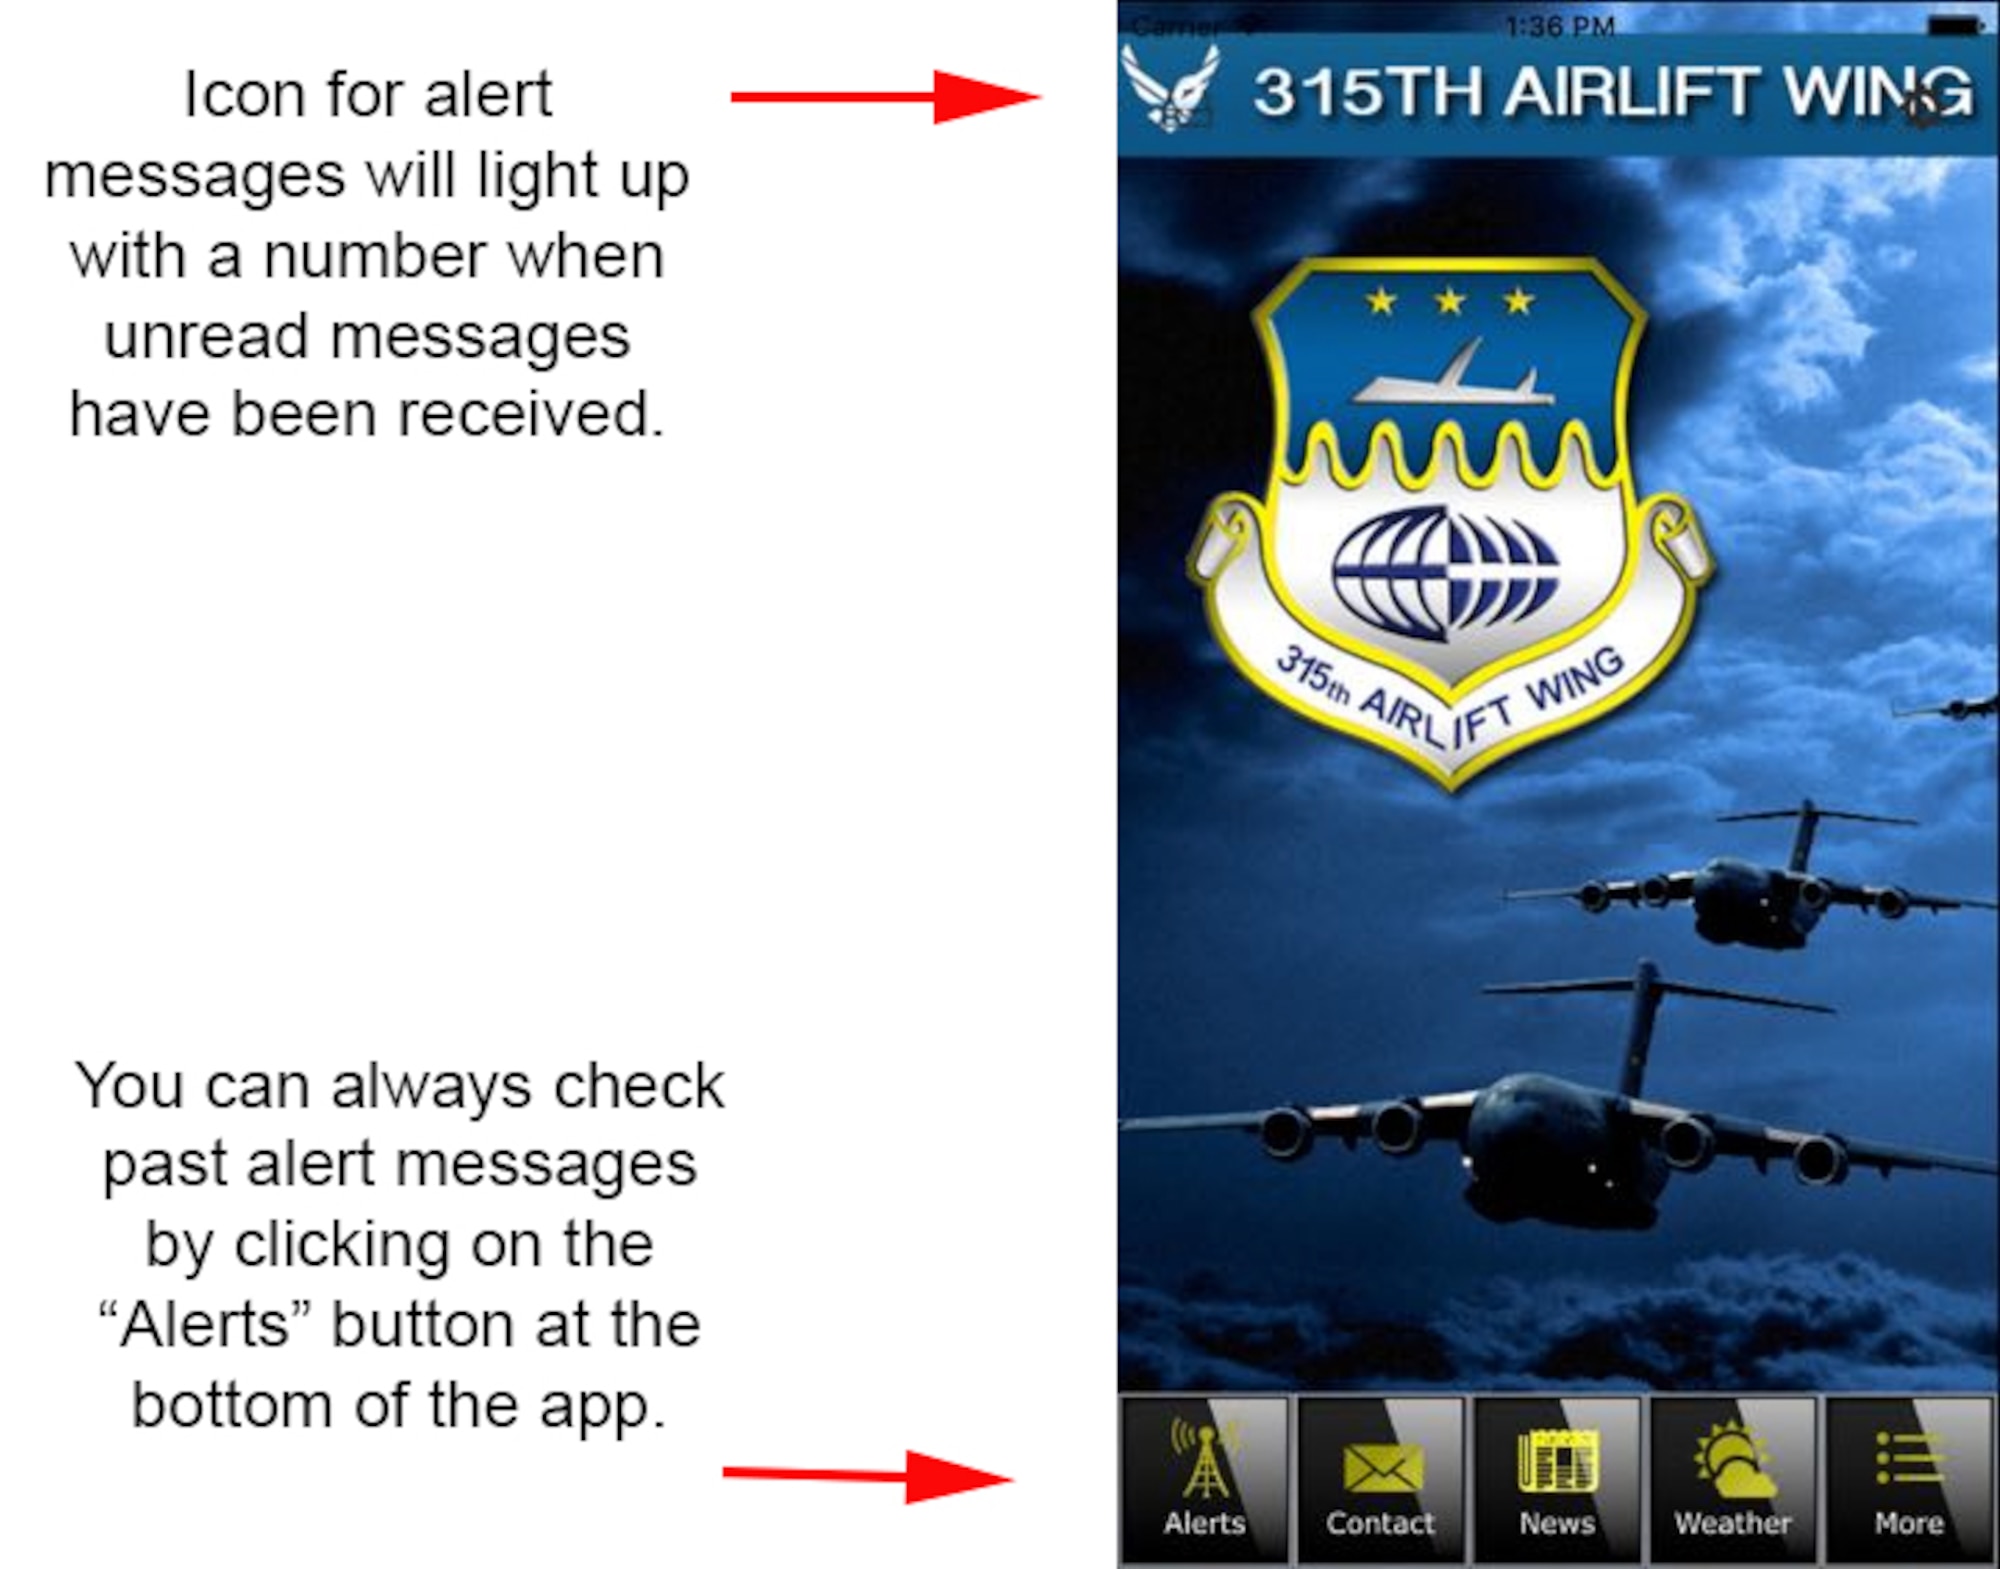 An upgrade of the 315th Airlift Wing mobile app includes an icon to indicate unread alert messages at the top left of the home screen.  (U.S. Air Force Graphic / Michael Dukes)